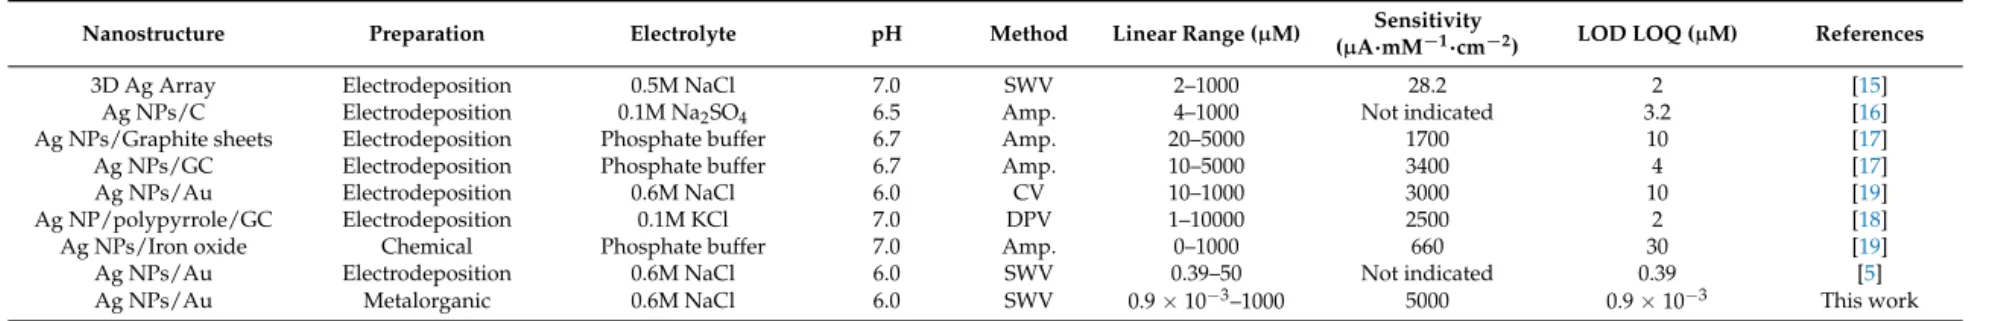 Table 1. Comparison of electrochemical sensors based on silver nanostructure for nitrate determination.